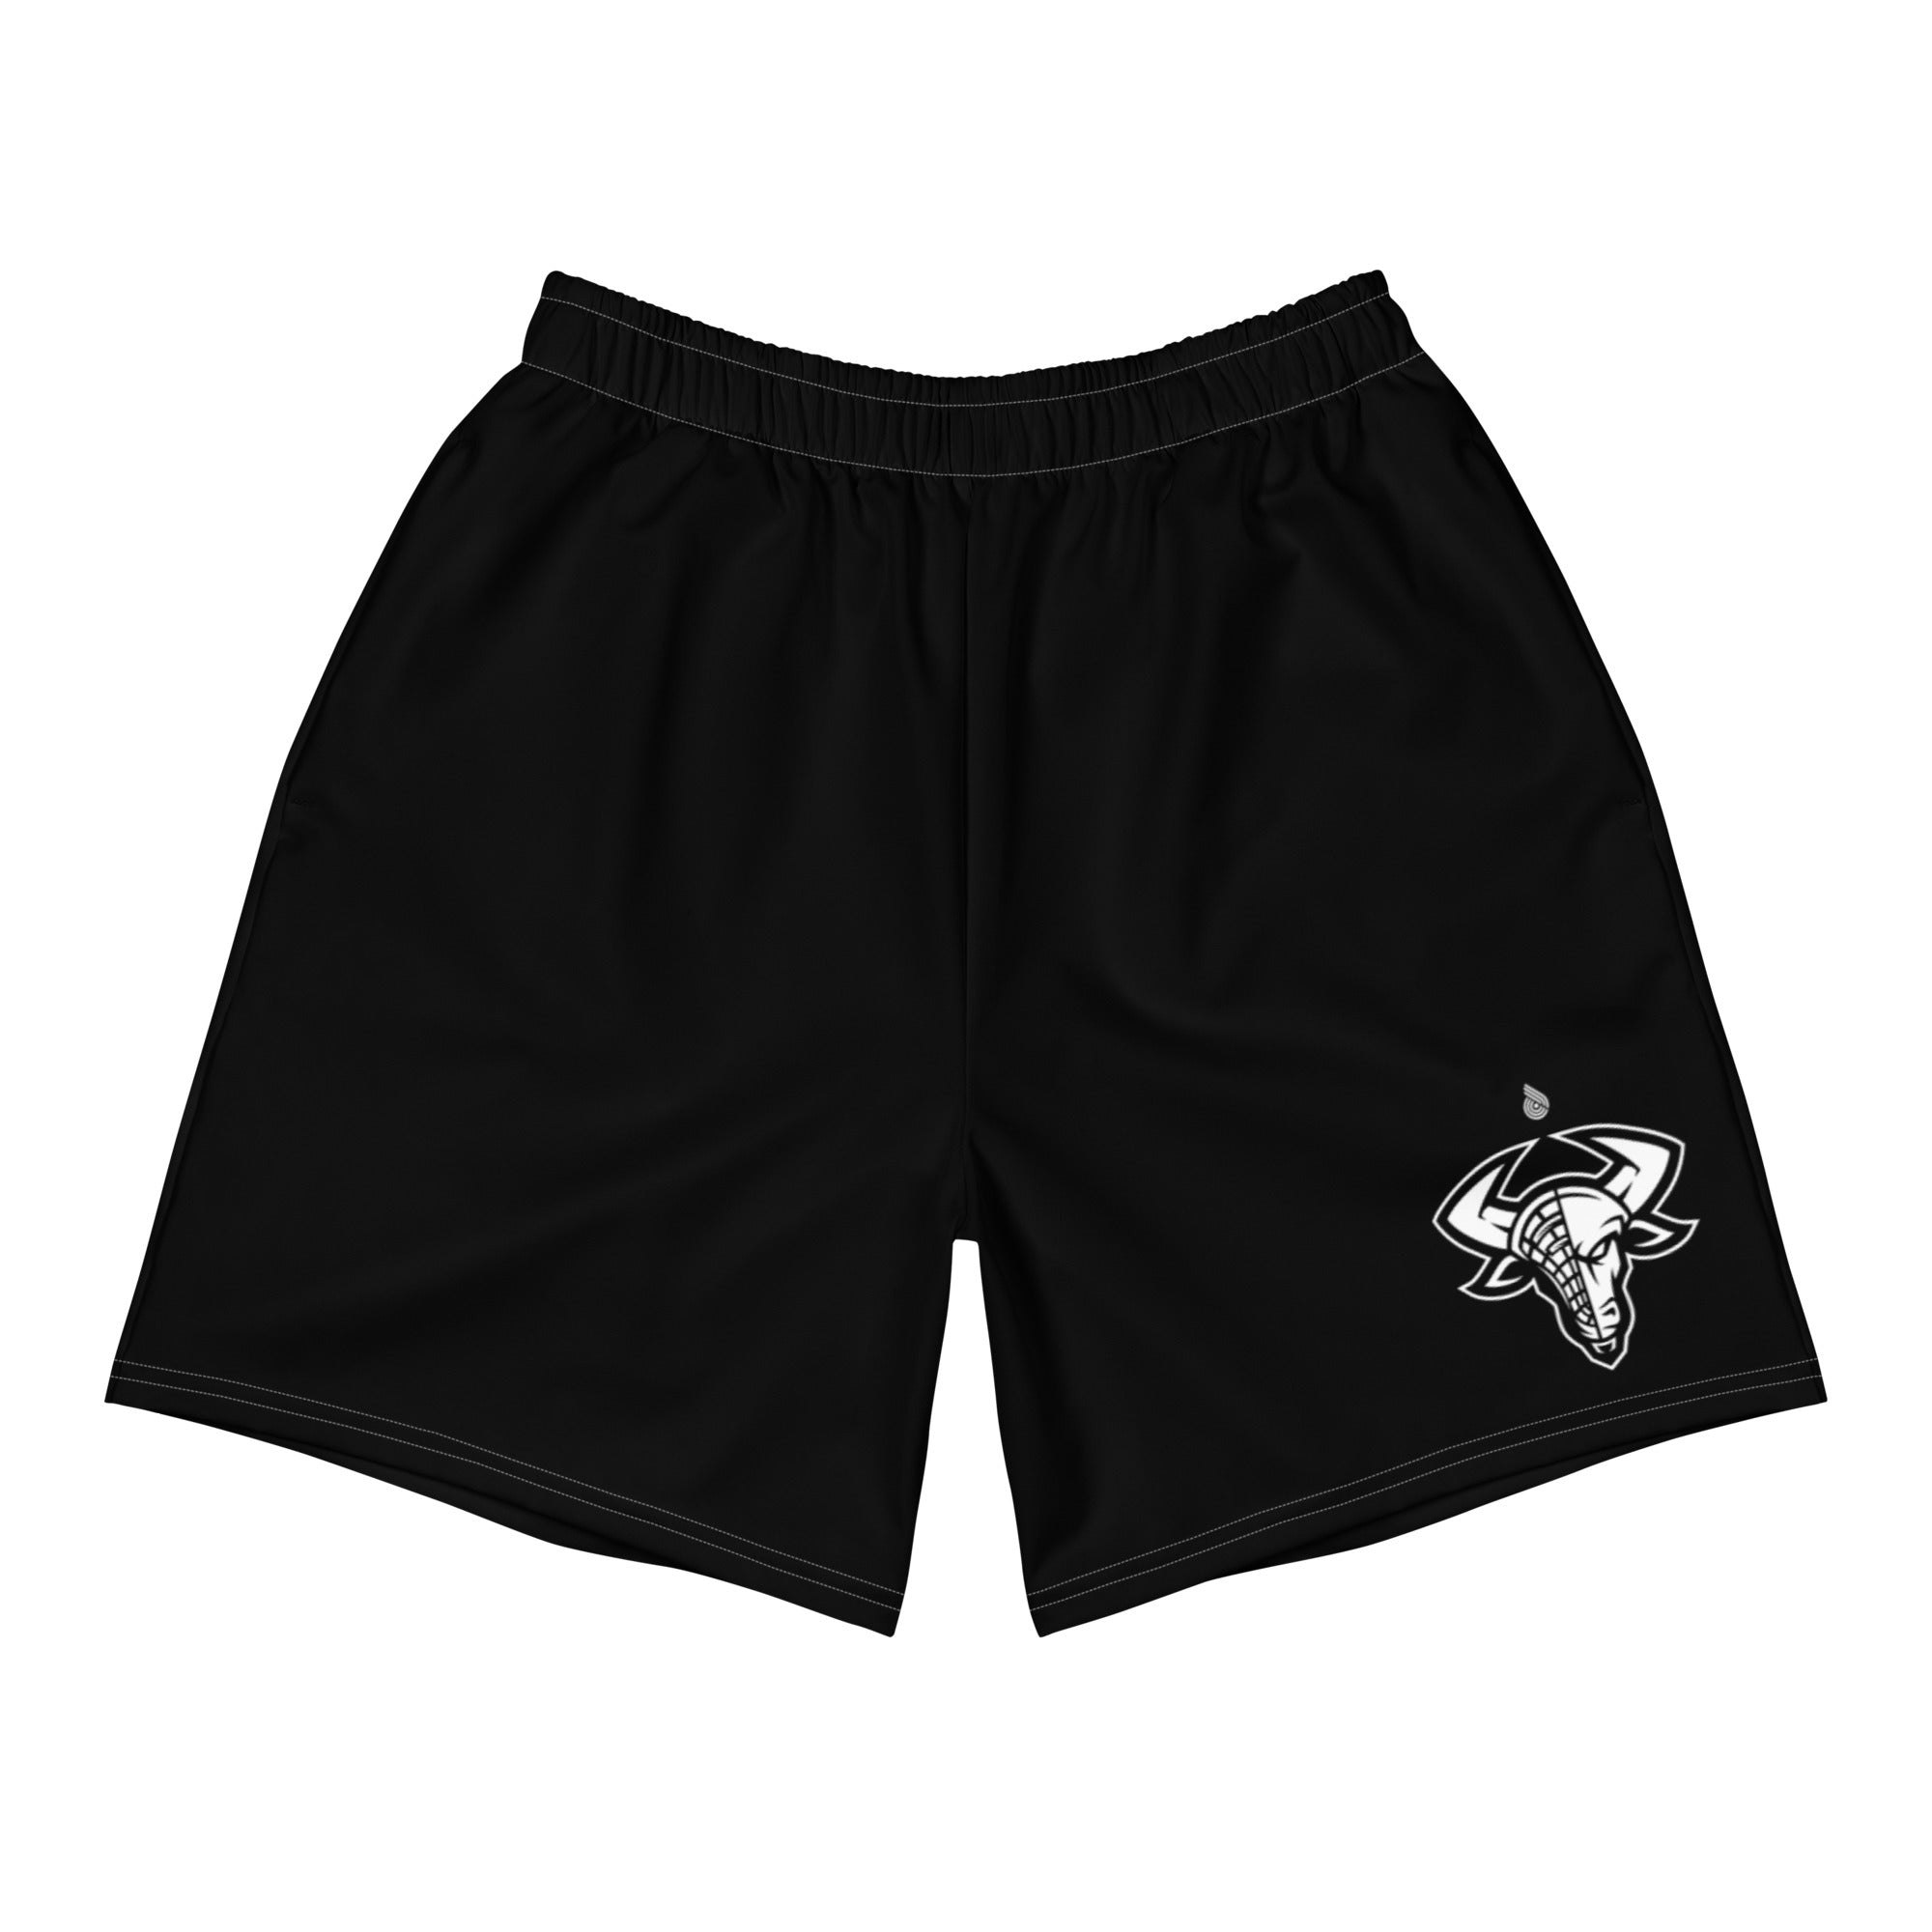 USF Men's Recycled Athletic Shorts